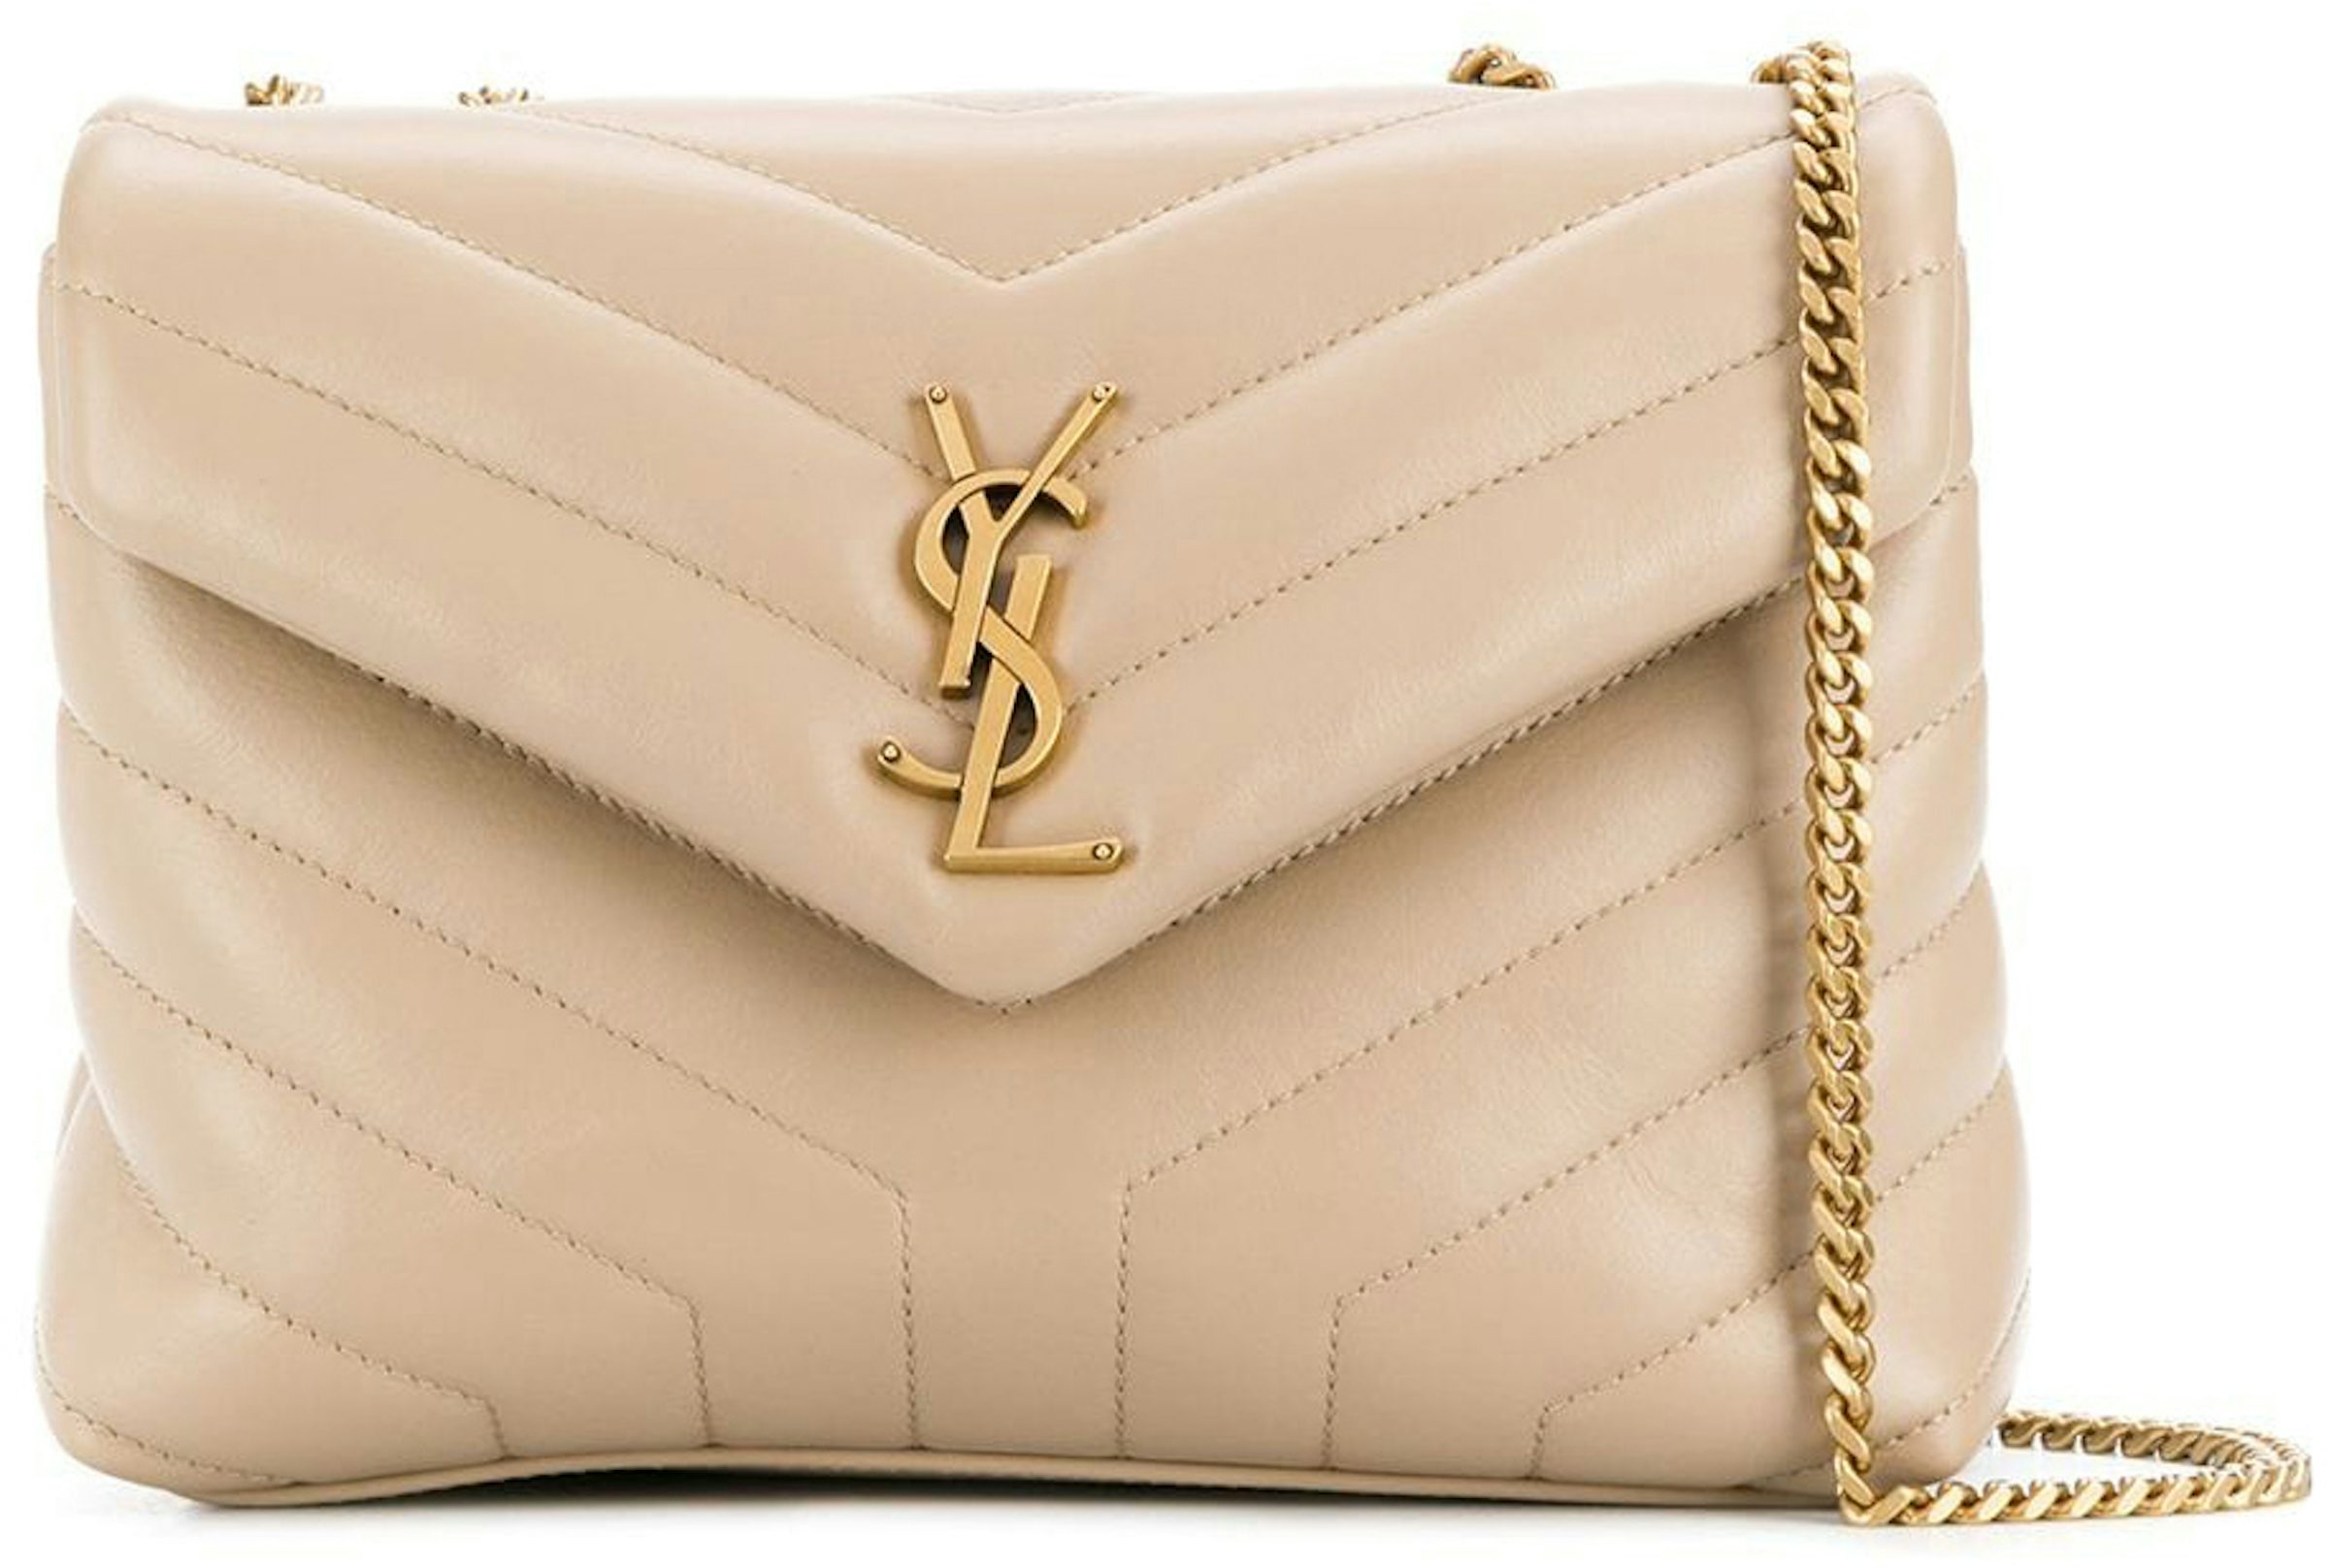 ysl.loulou small